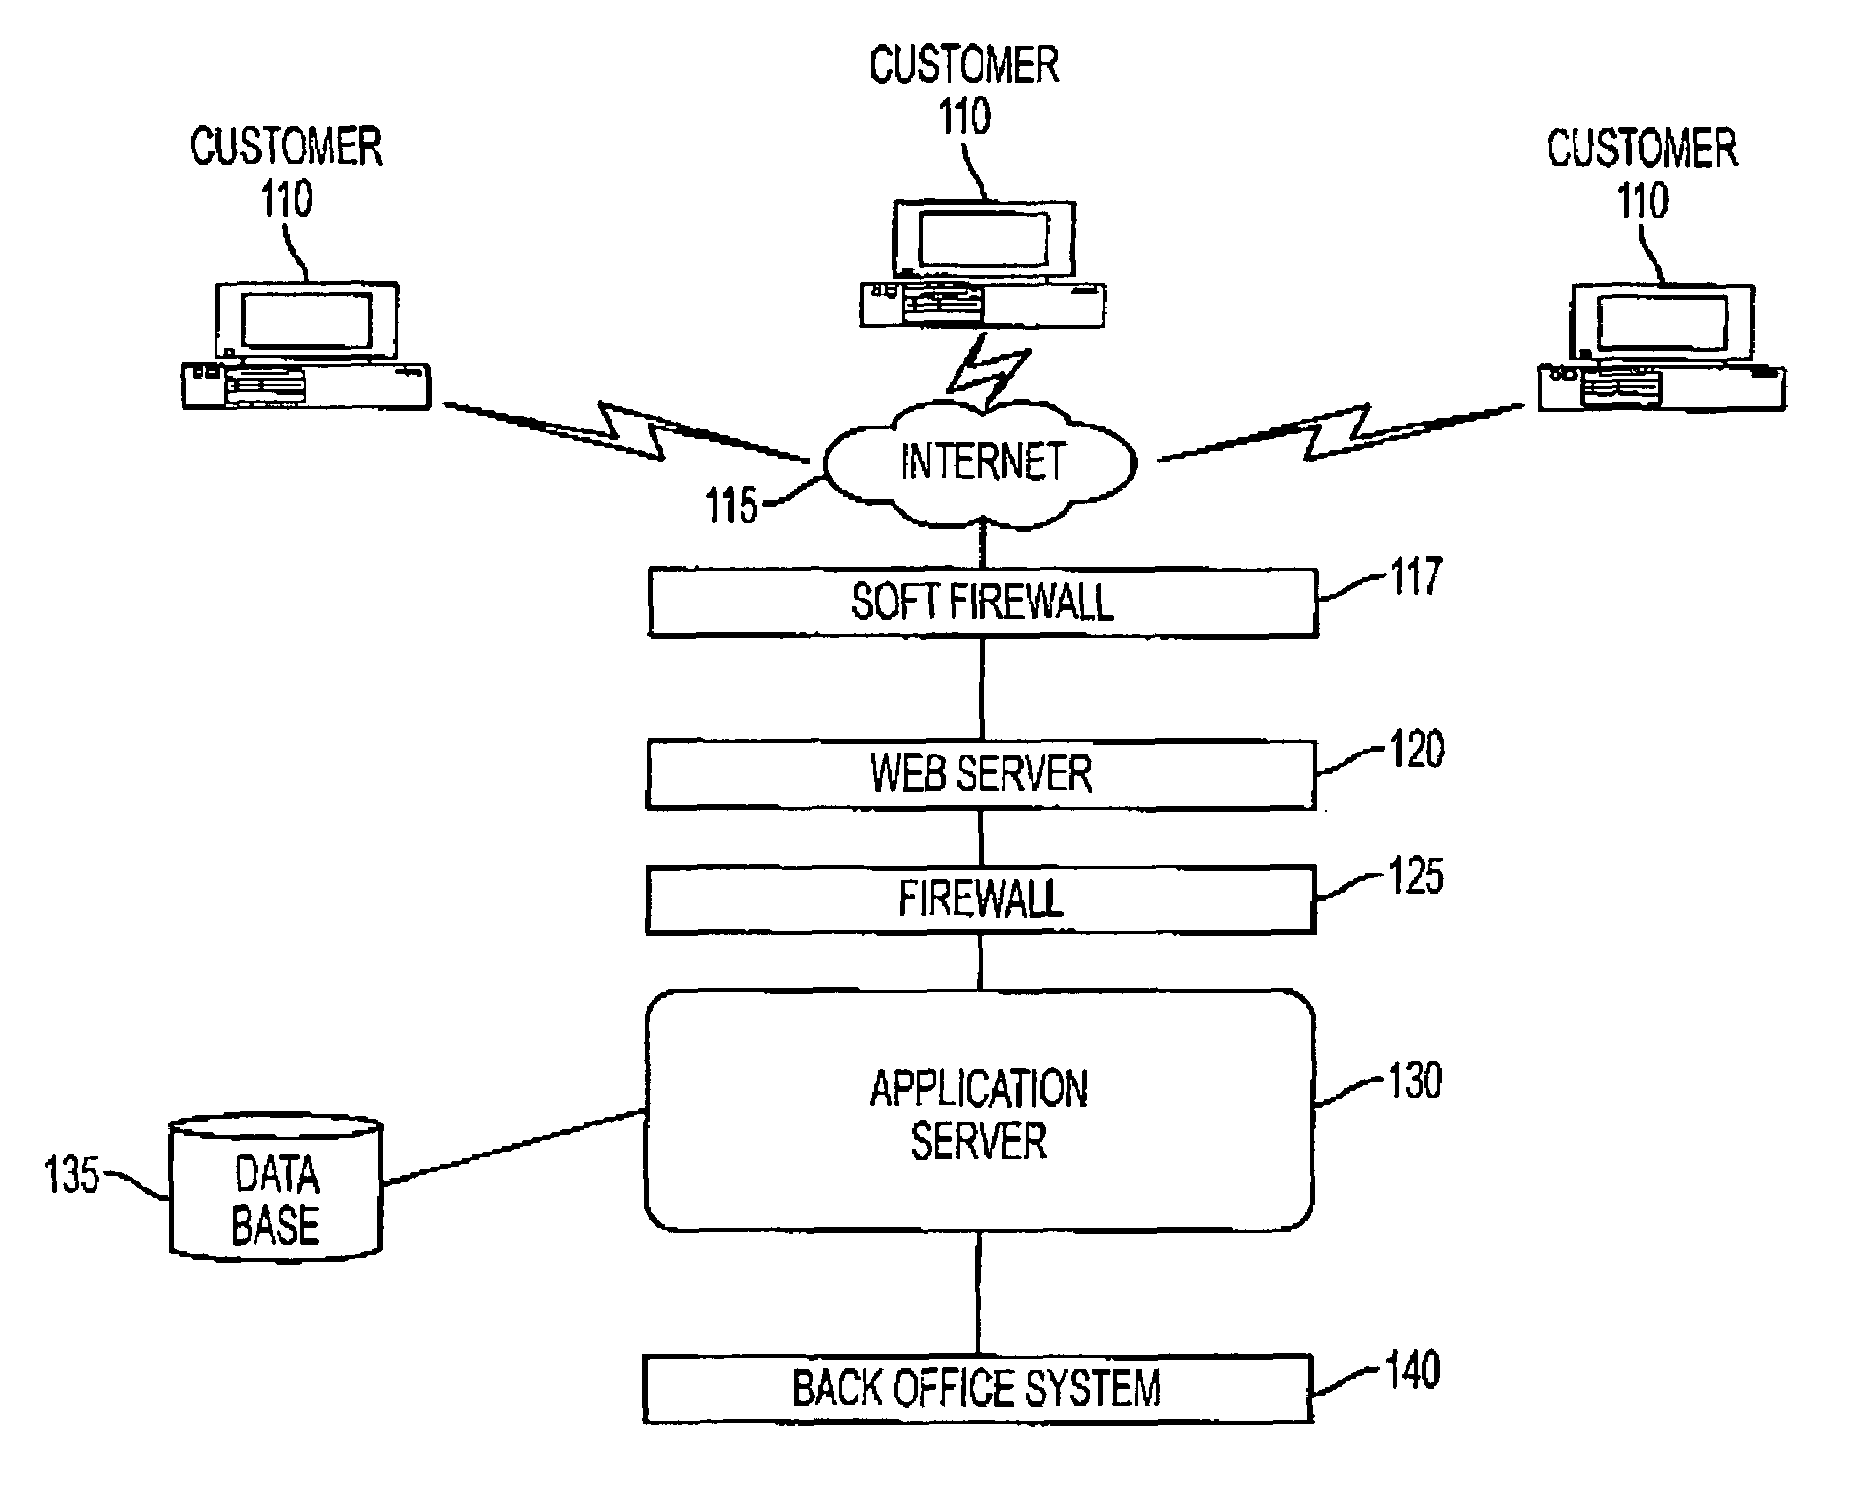 System and method for executing deposit transactions over the internet